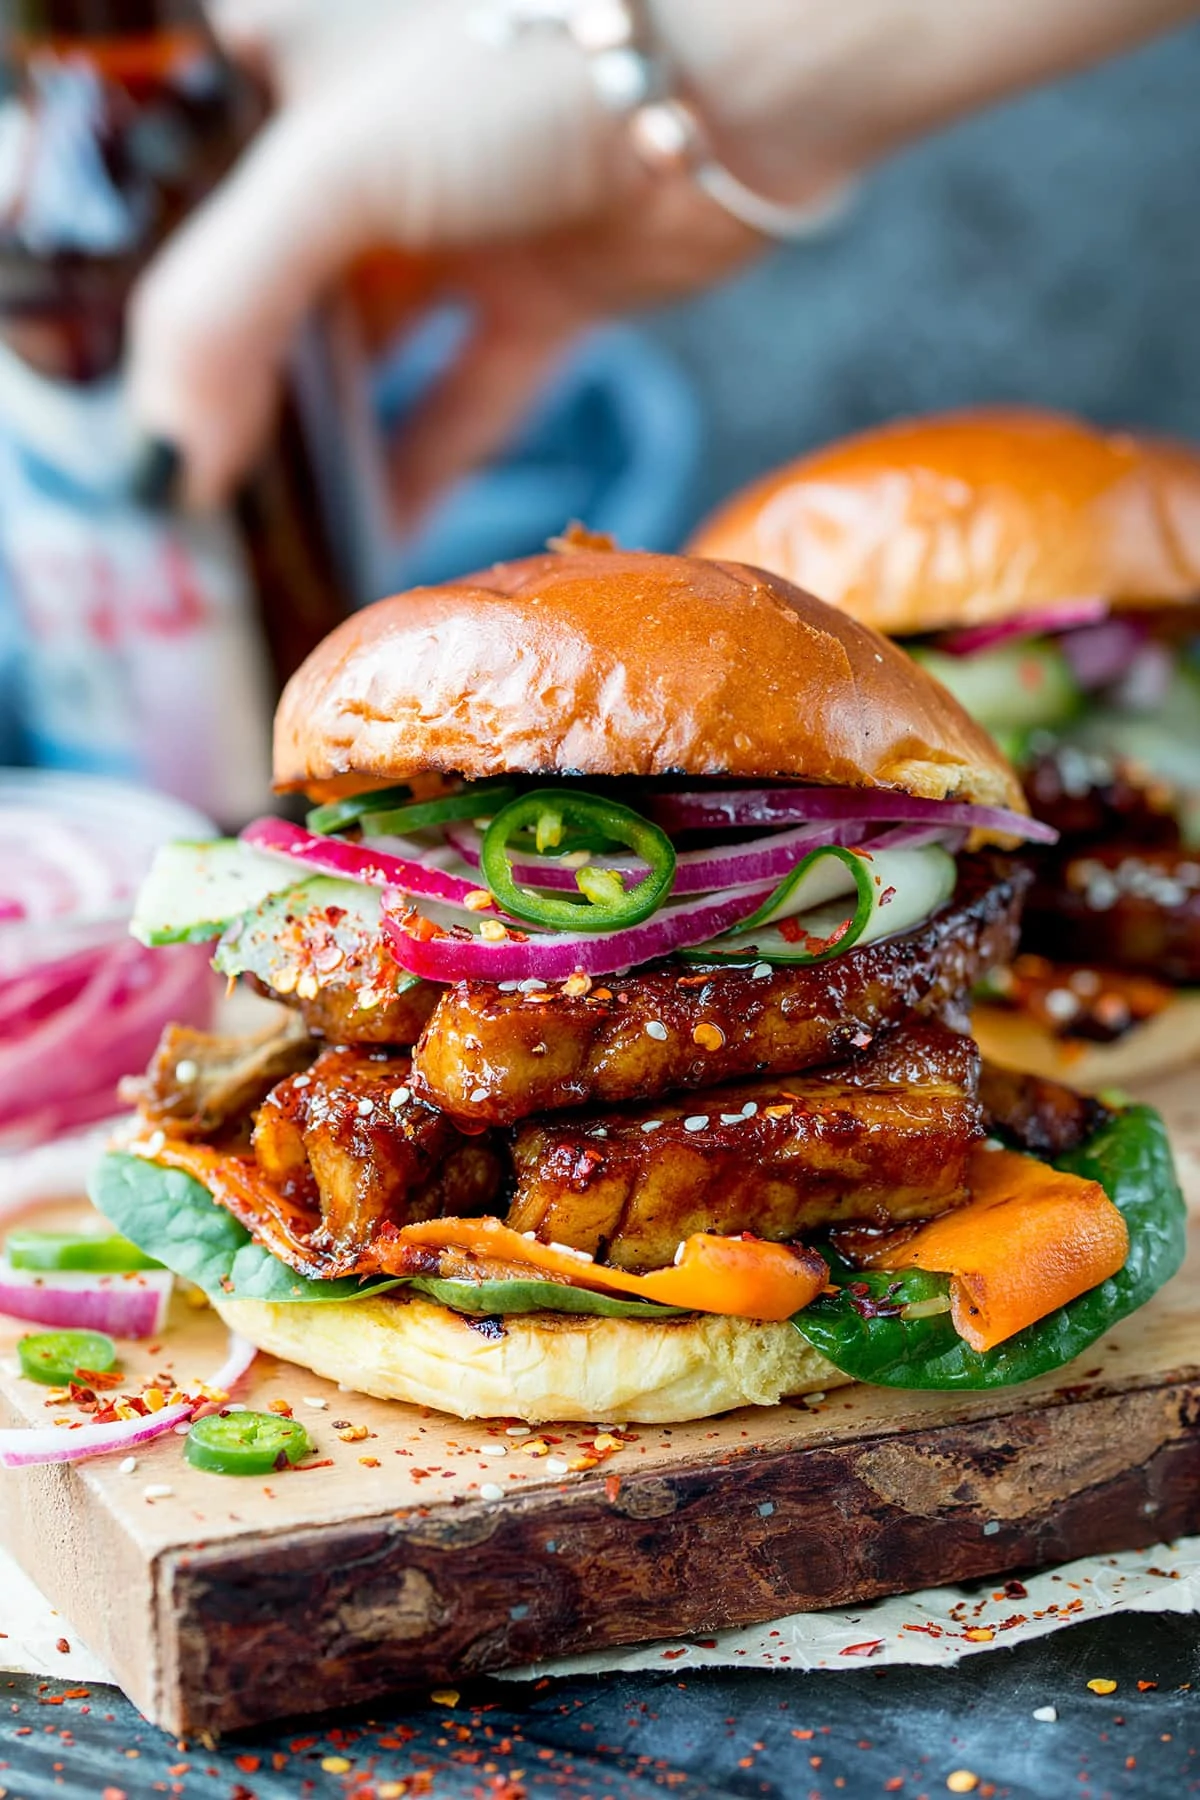 Side on image of a sticky pork belly burger with carrot, spinach, red onion and jalapeños on a brioche bun. The burger is on a wooden board and there is a further burger in the background, just in shot.
There is also a hand picking up a bottle of beer in the rear of the shot.